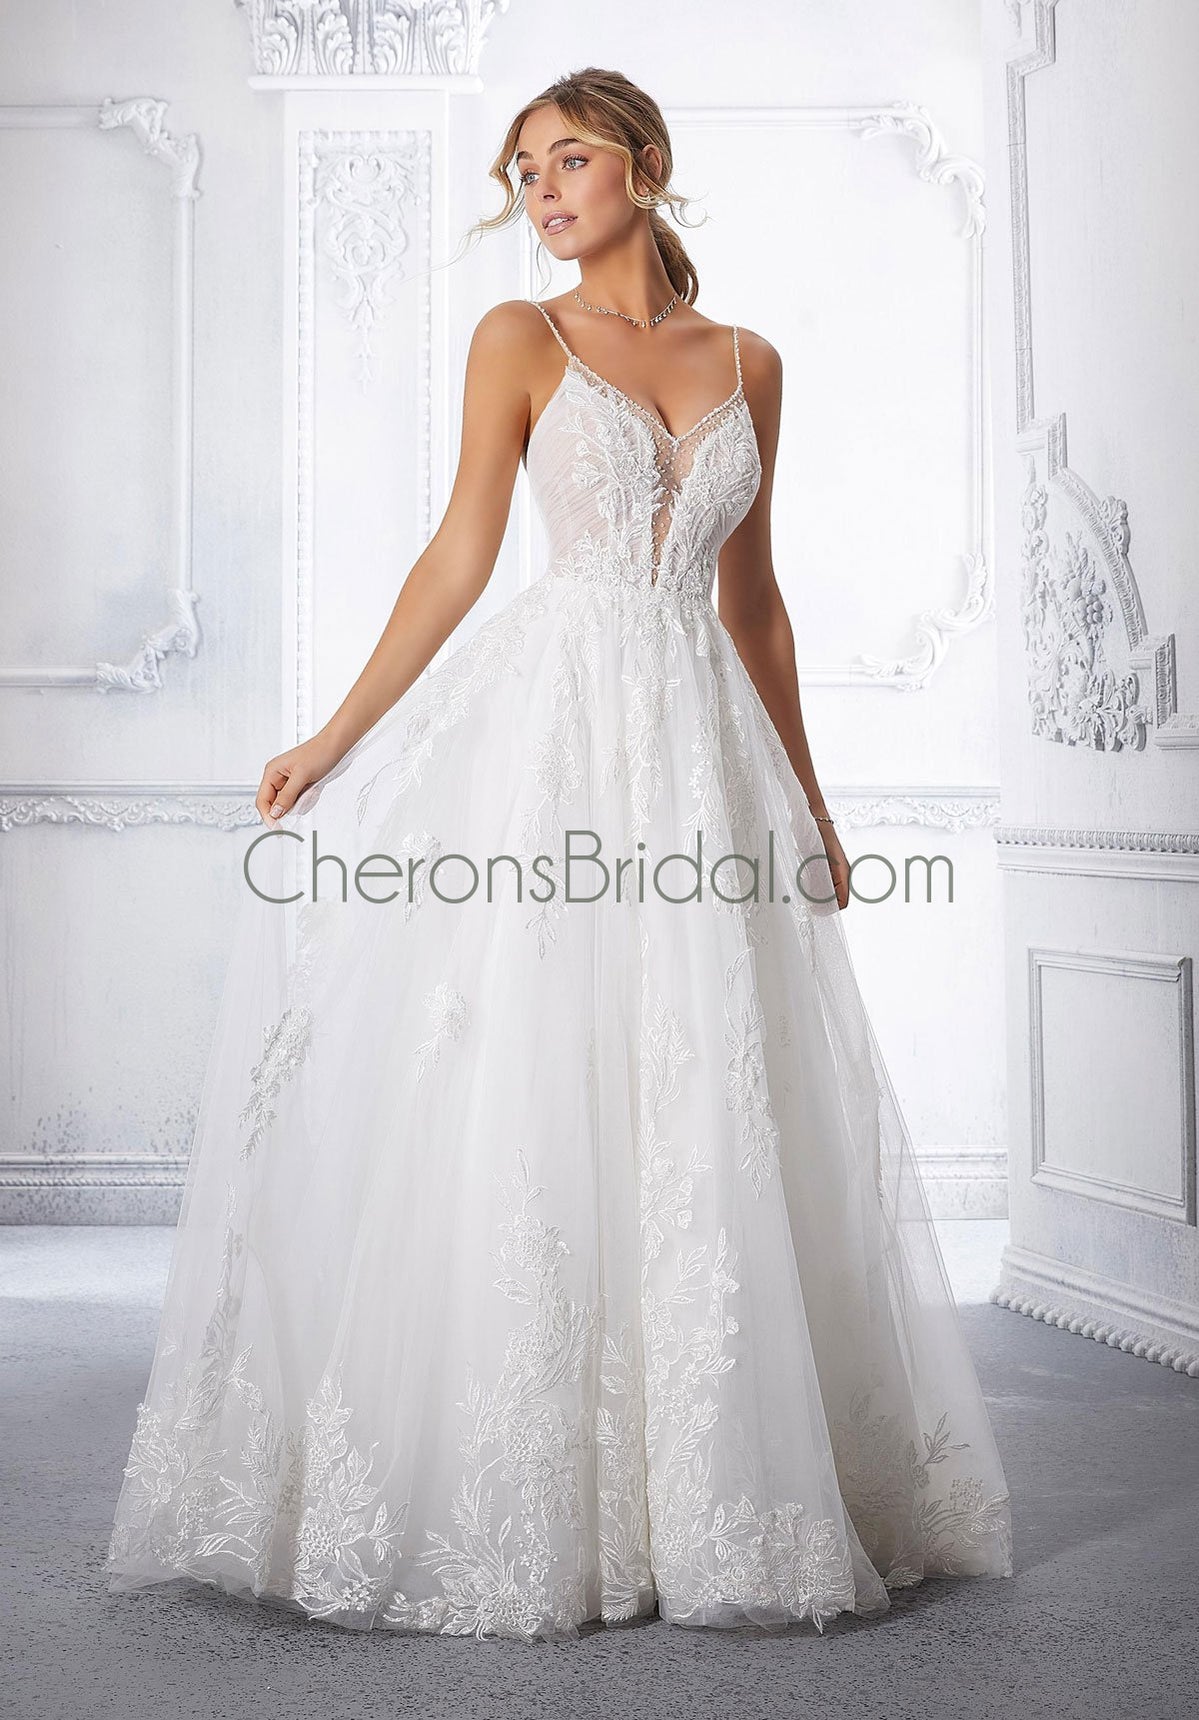 Morilee - 2370 - Christianna - Cheron's Bridal, Wedding Gown - Morilee Line - - Wedding Gowns Dresses Chattanooga Hixson Shops Boutiques Tennessee TN Georgia GA MSRP Lowest Prices Sale Discount